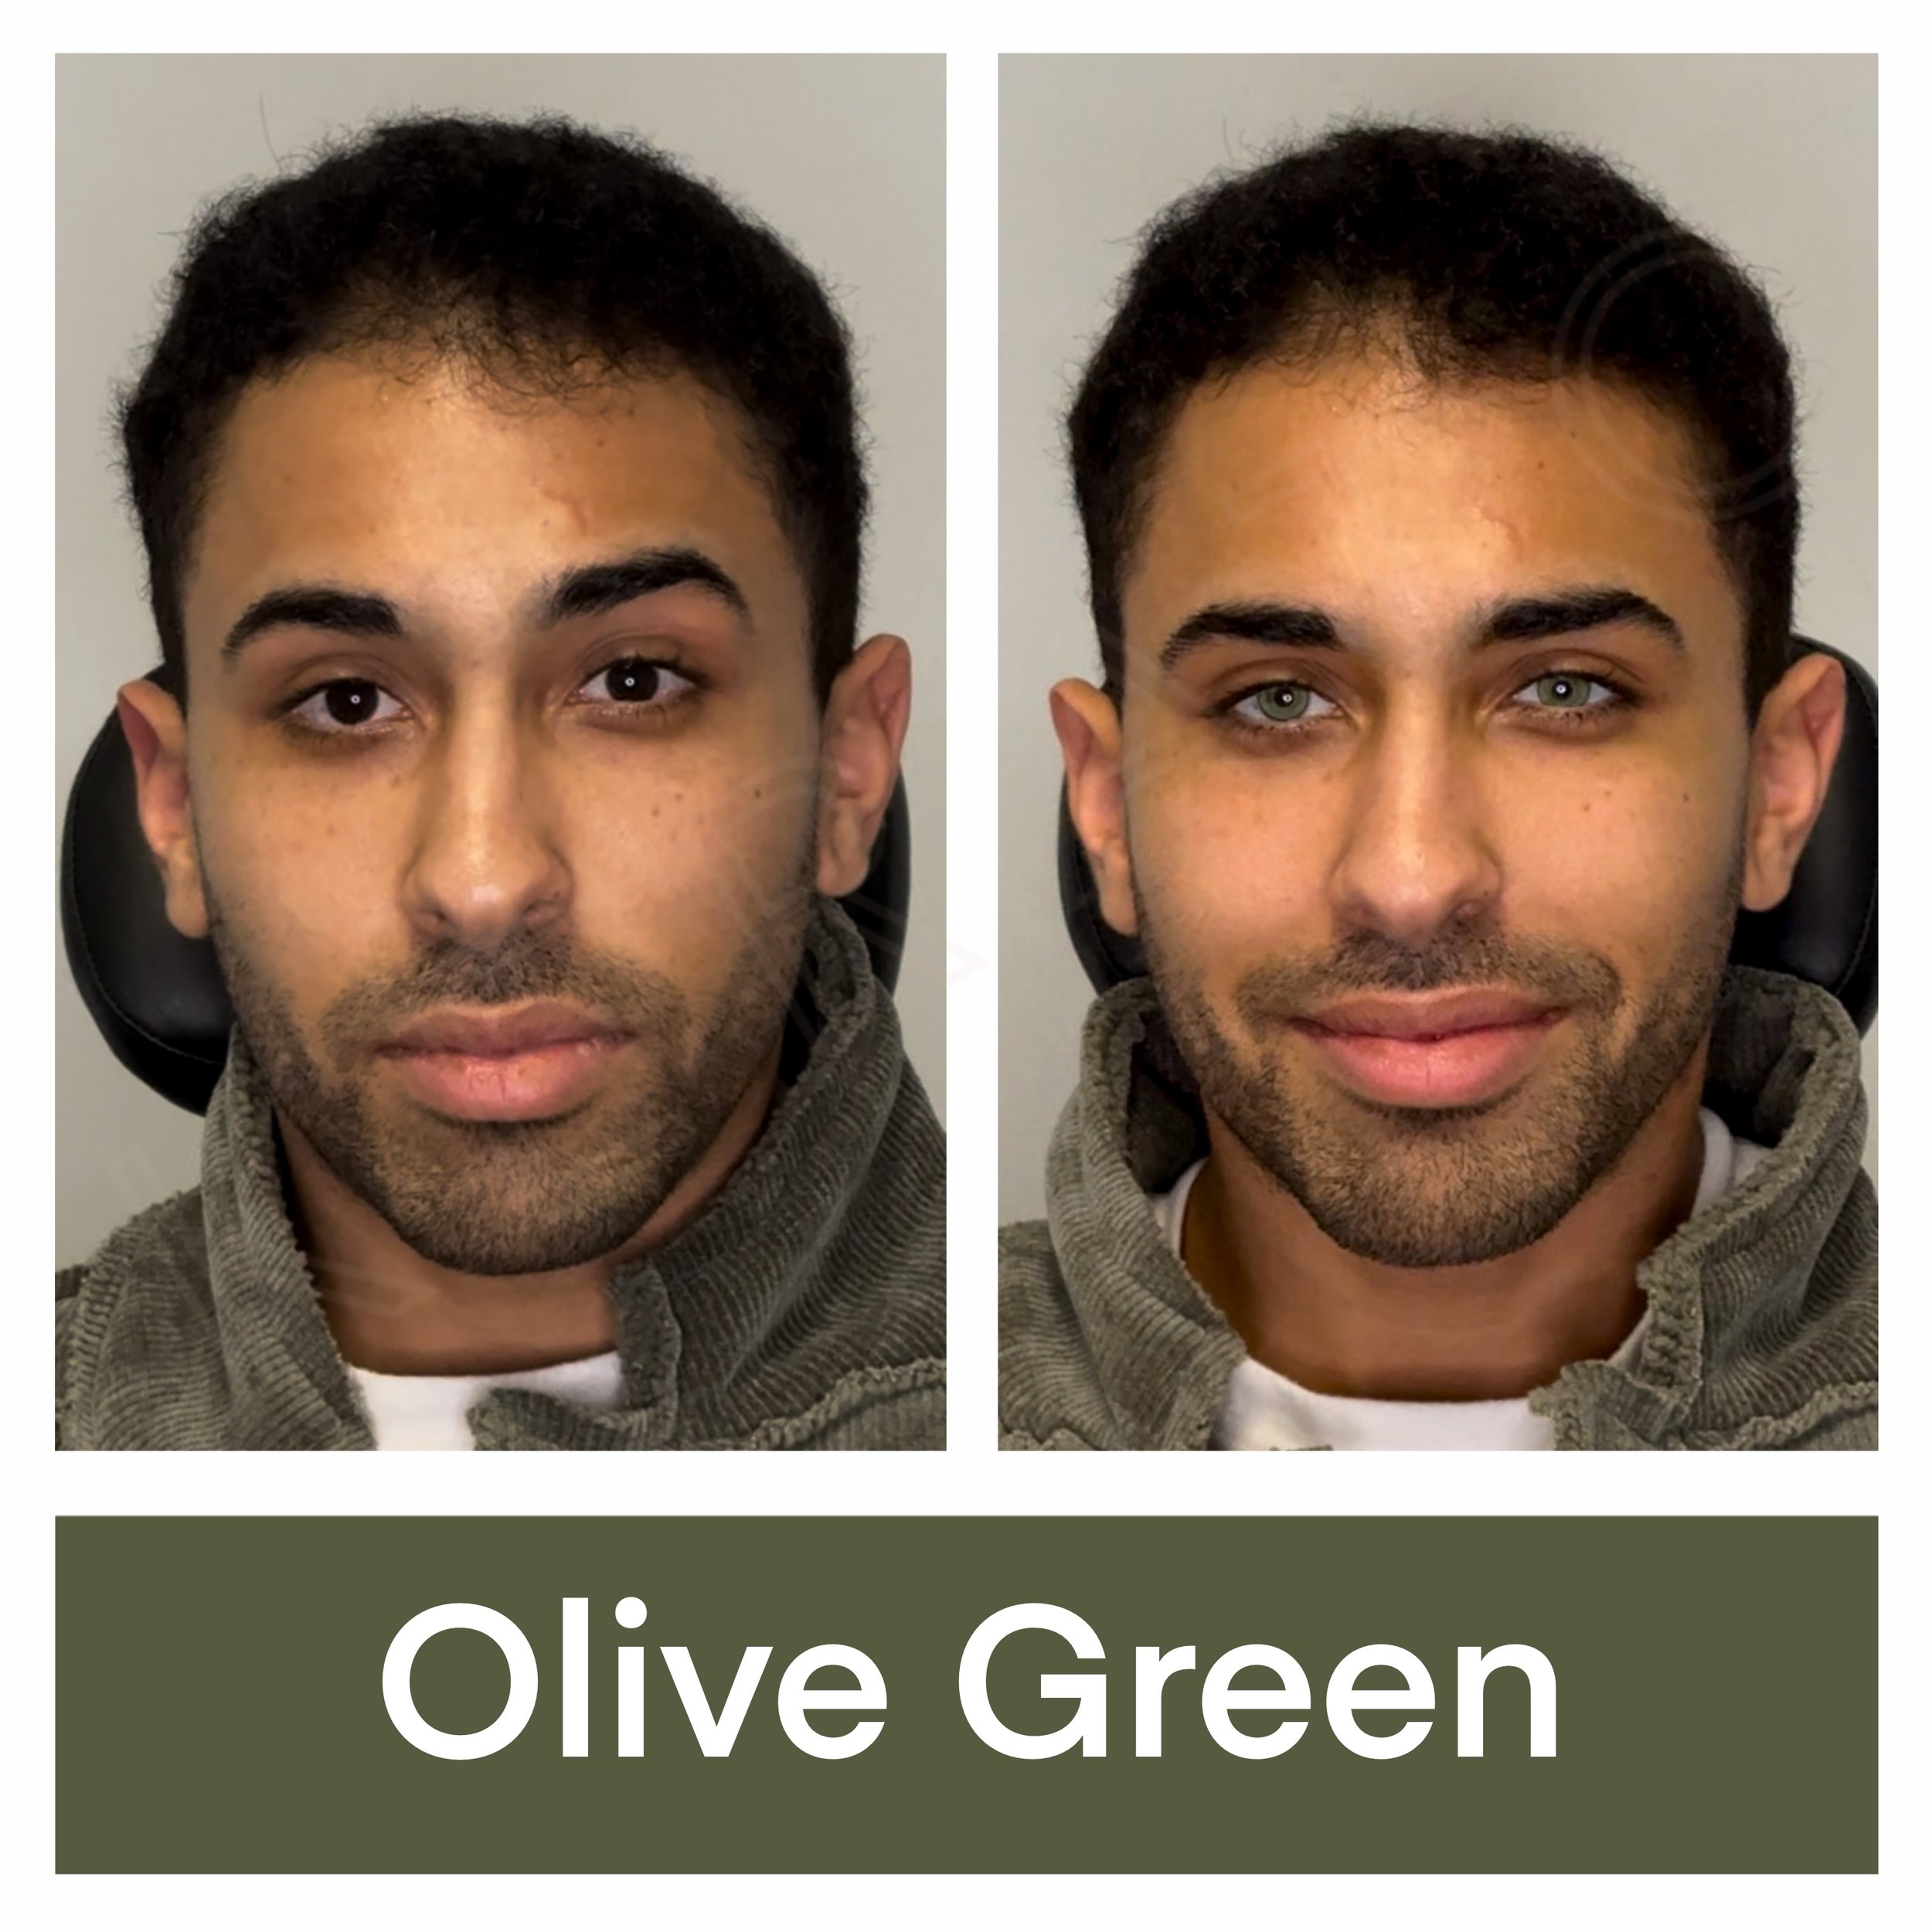 Eye Color Change with Olive Green Pigment at KERATO